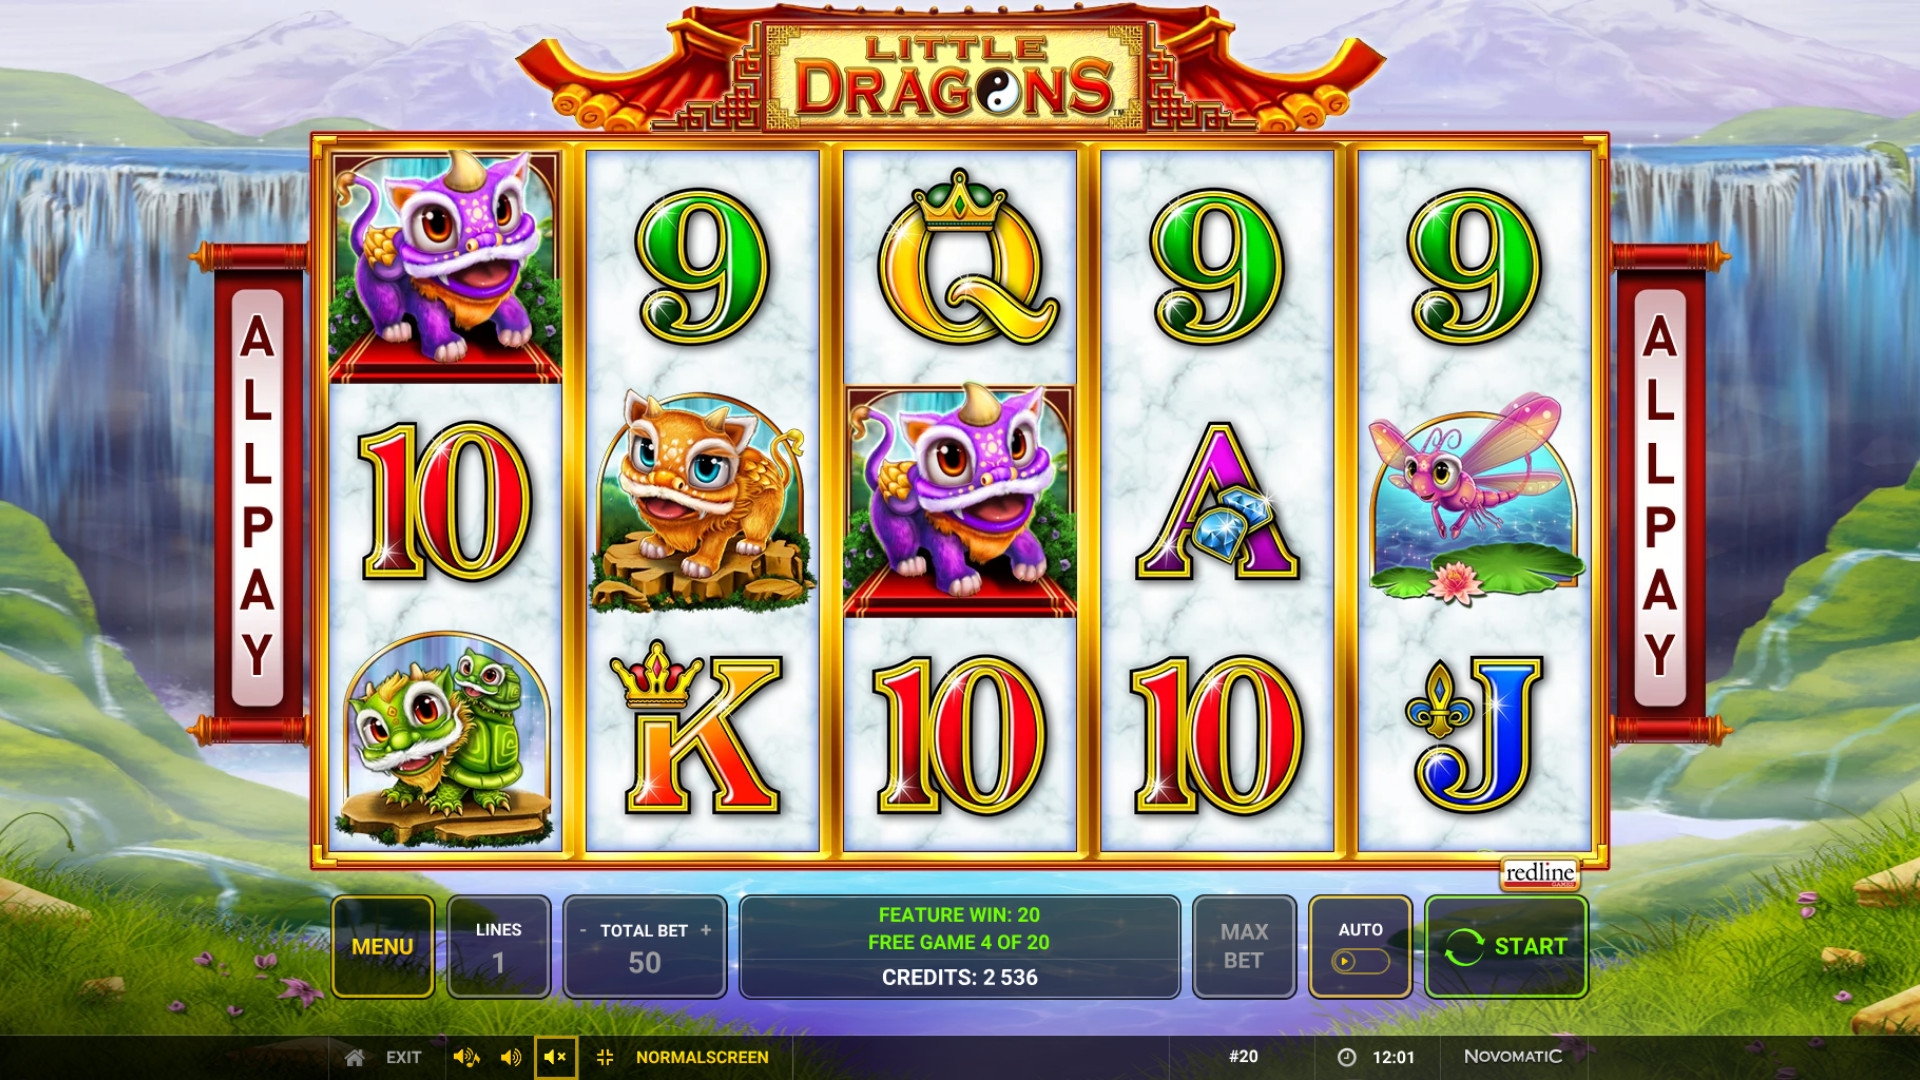 Little Dragons (Little Dragons) from category Slots